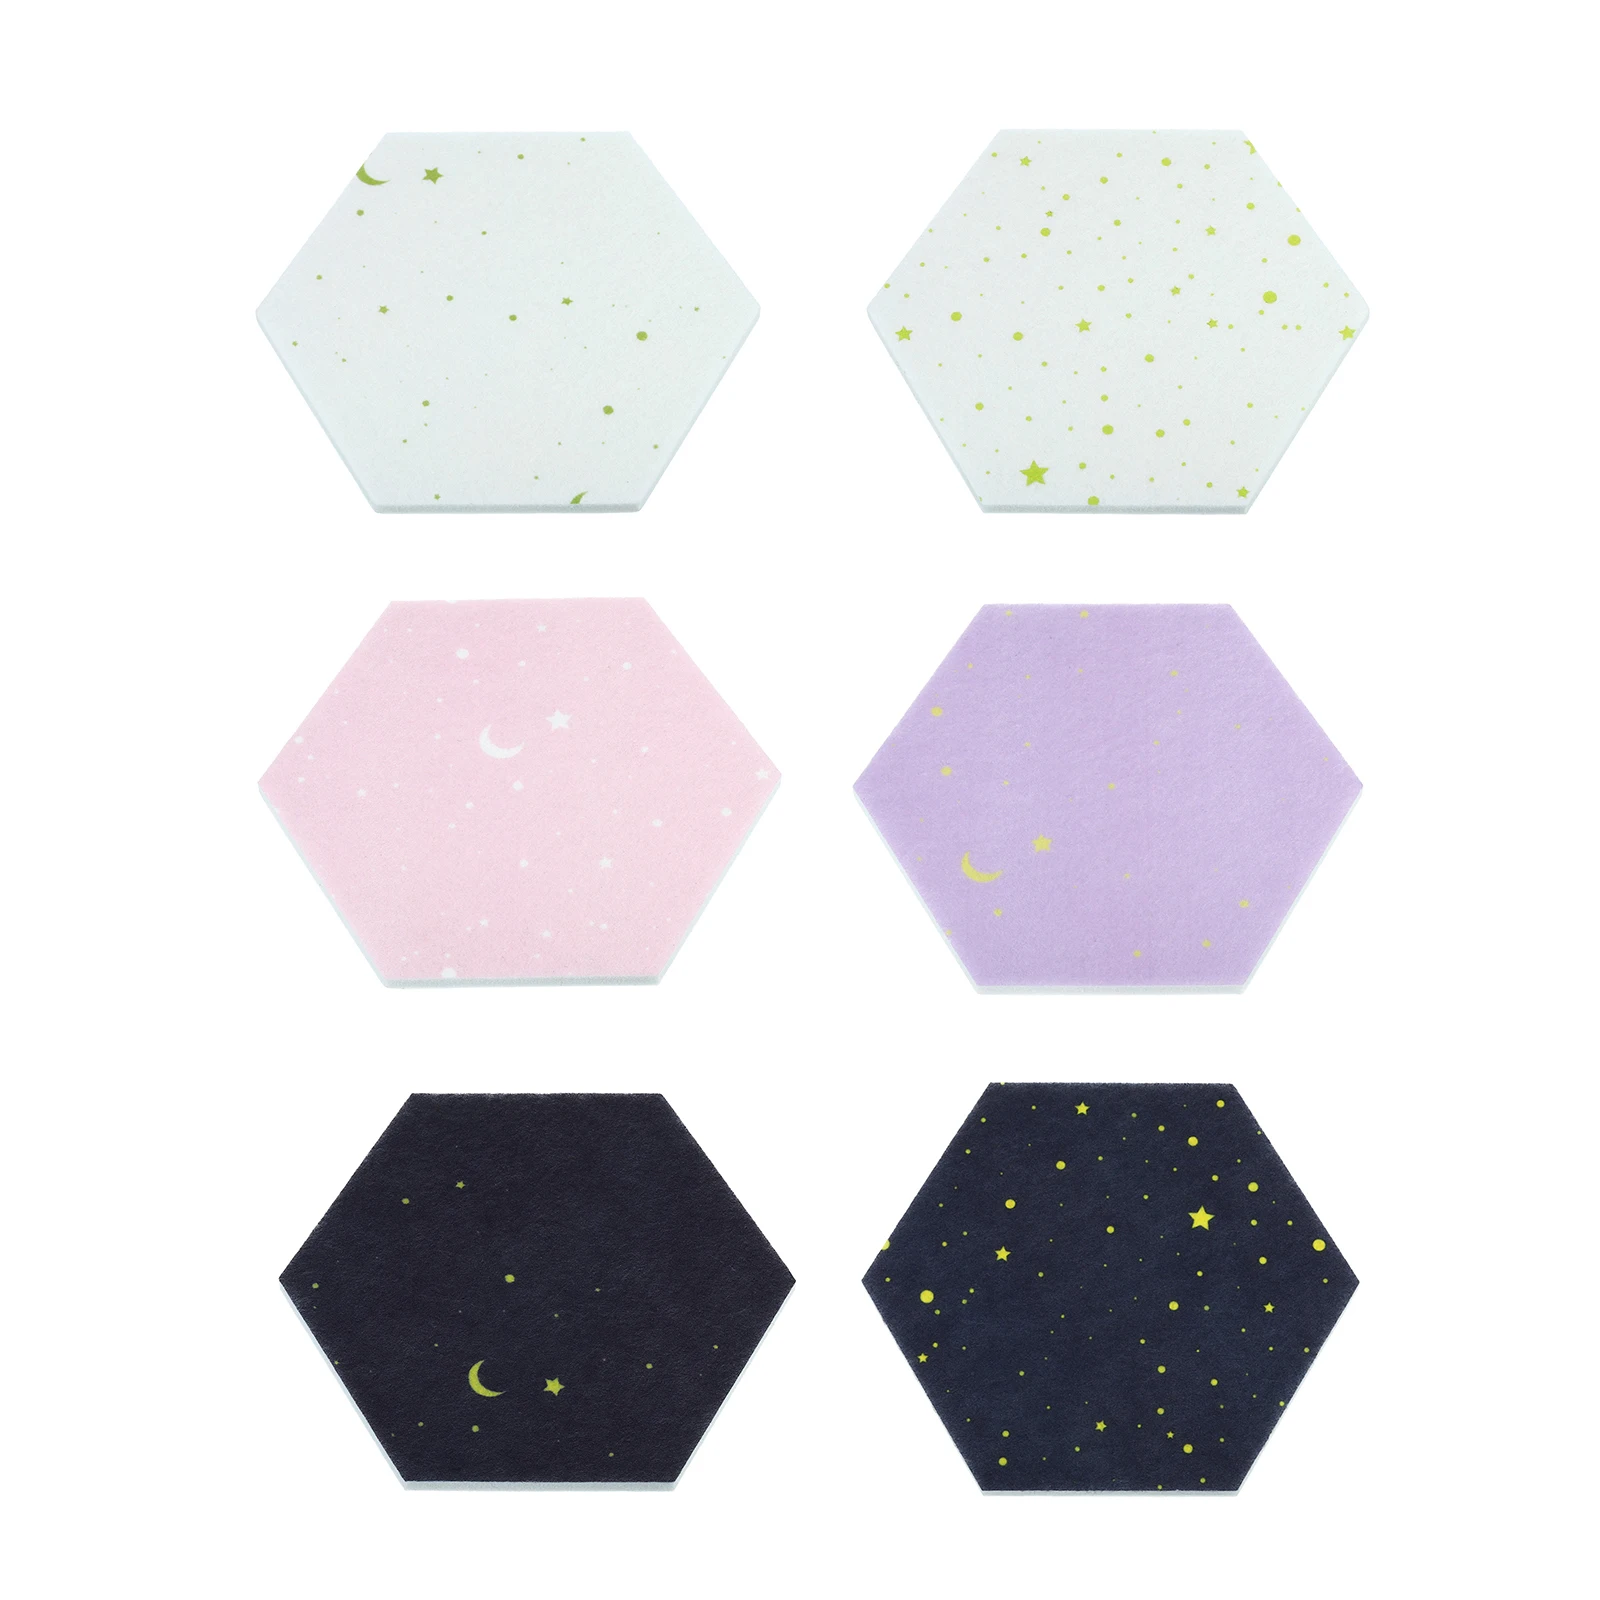 4Pcs Hexagon Felt Board Tile Bulletin Notice Cork Self Adhesive Pin Board Message Room Wall Decor Sticky Notes Photo Display 6pcs assorted colors self adhesive hexagonal felt wall bulletin memo photos letter message display board for home office decor